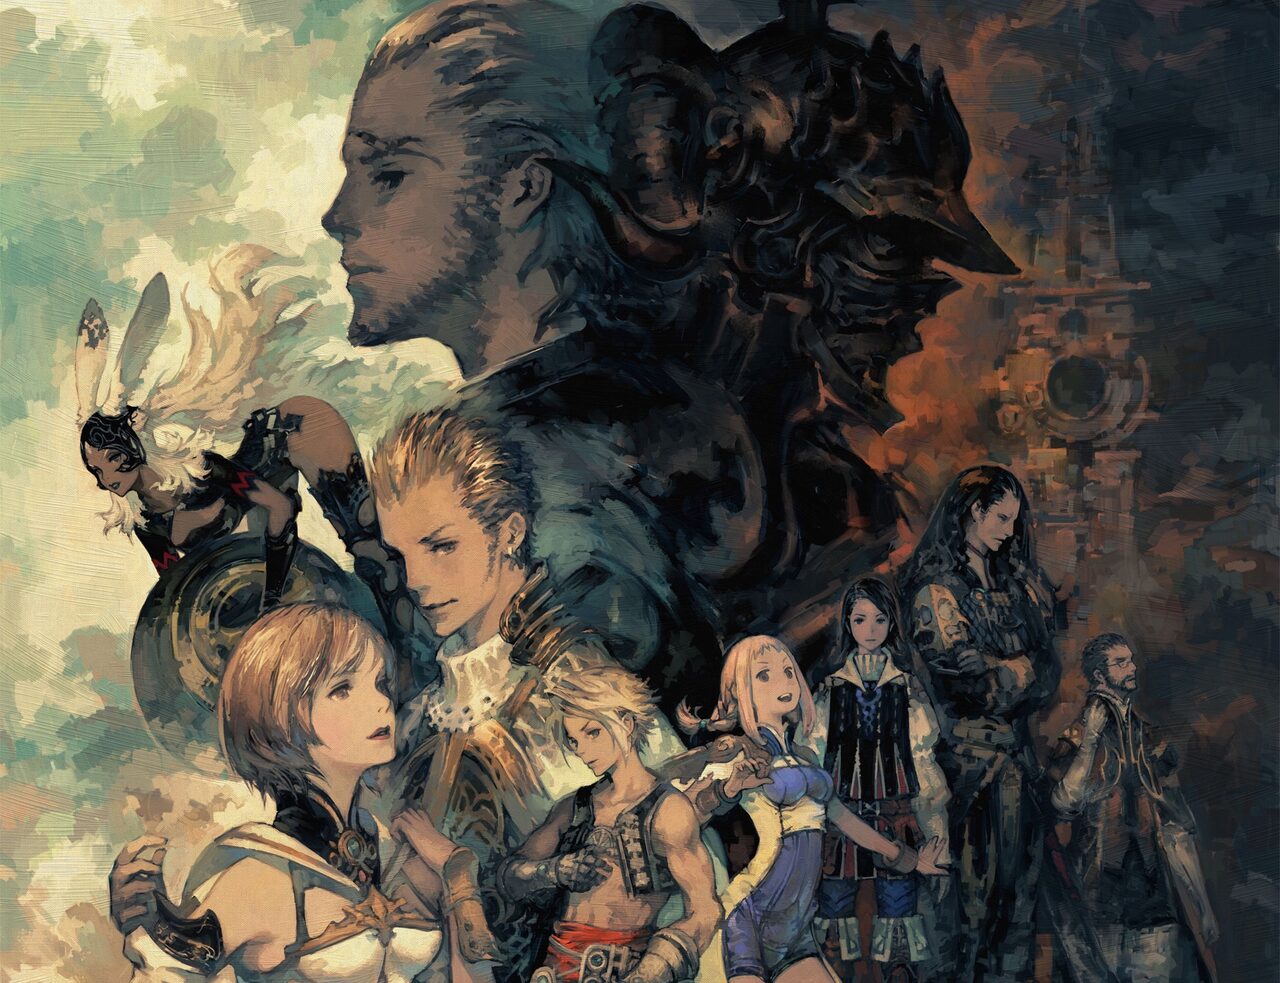 Final Fantasy XII: The Zodiac Age Collector's Edition PlayStation 4